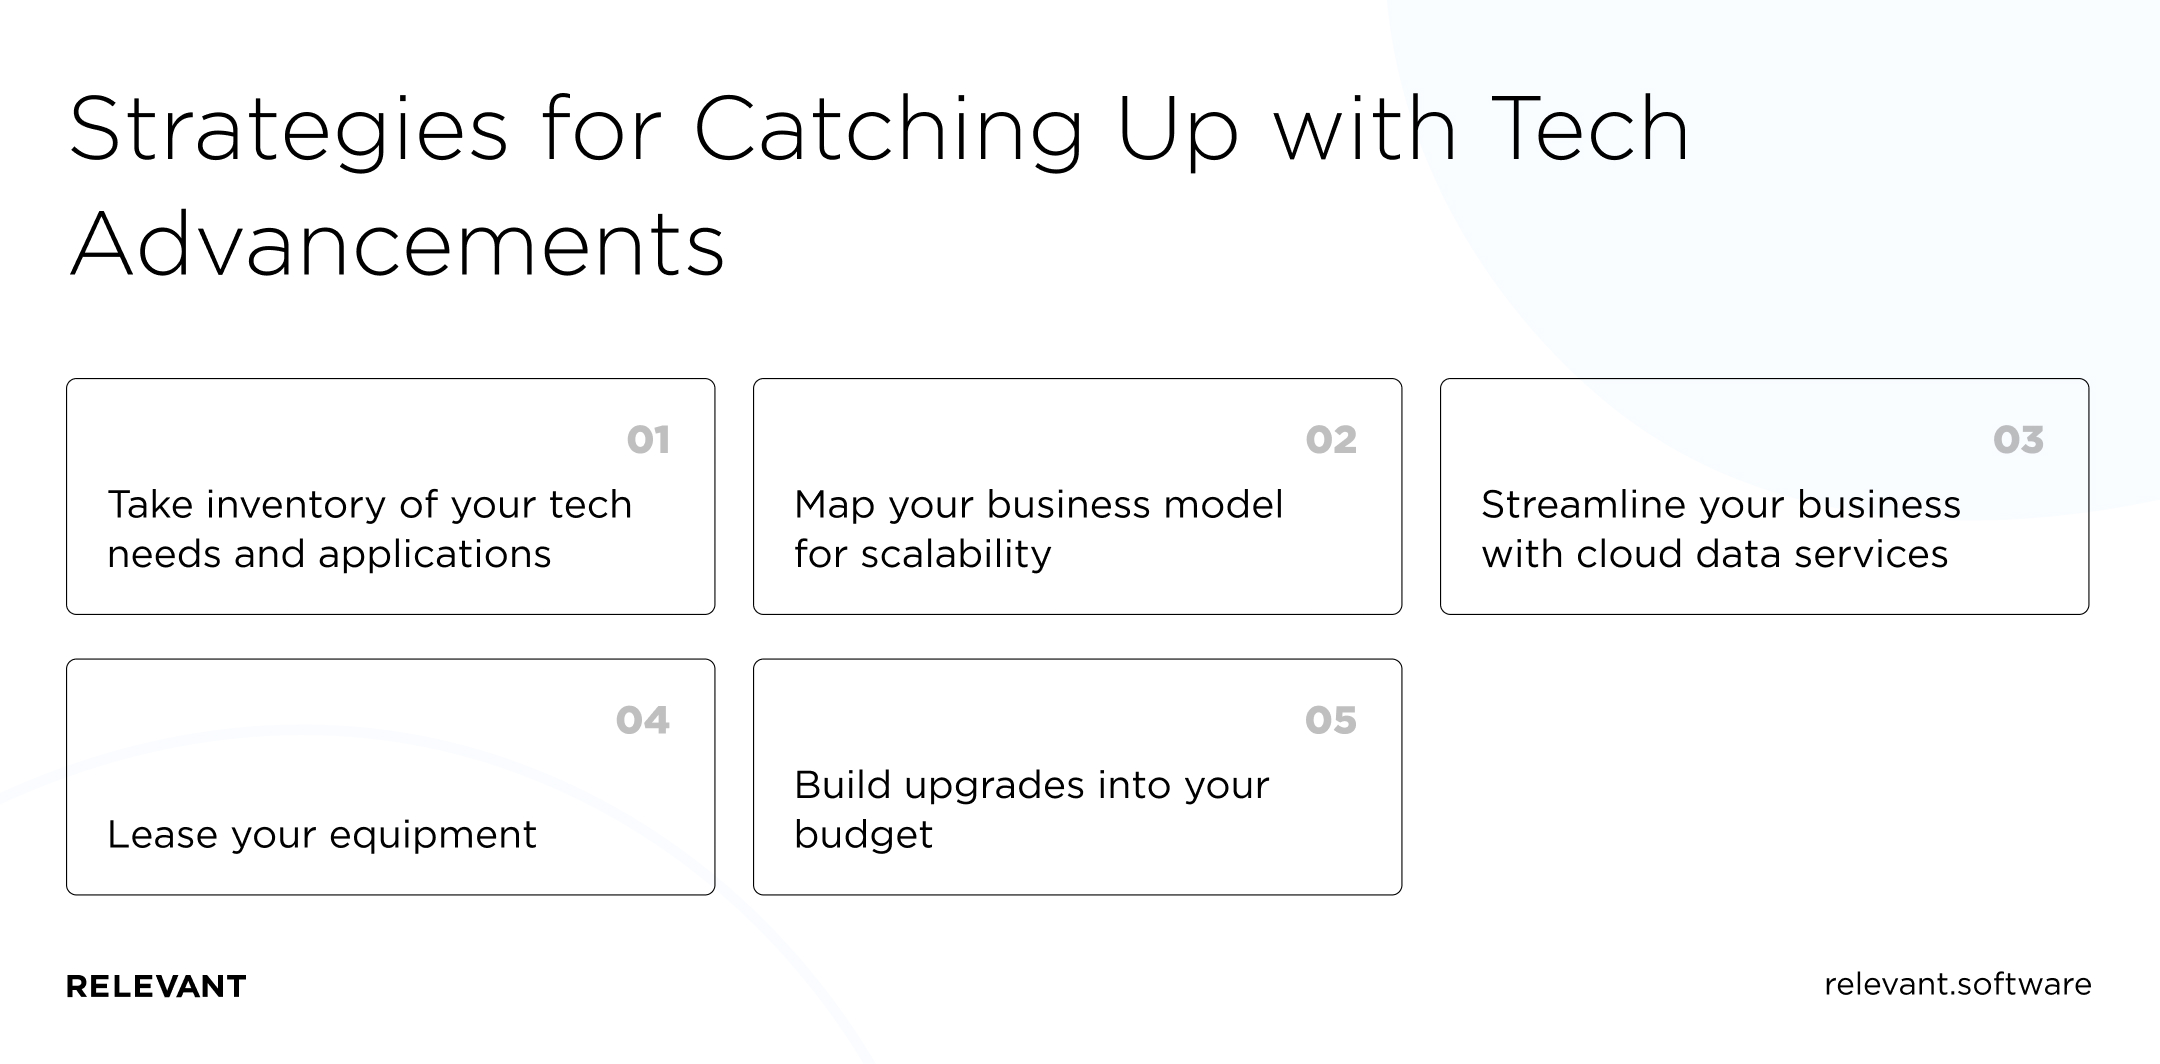 Strategies for catching up with tech advancements